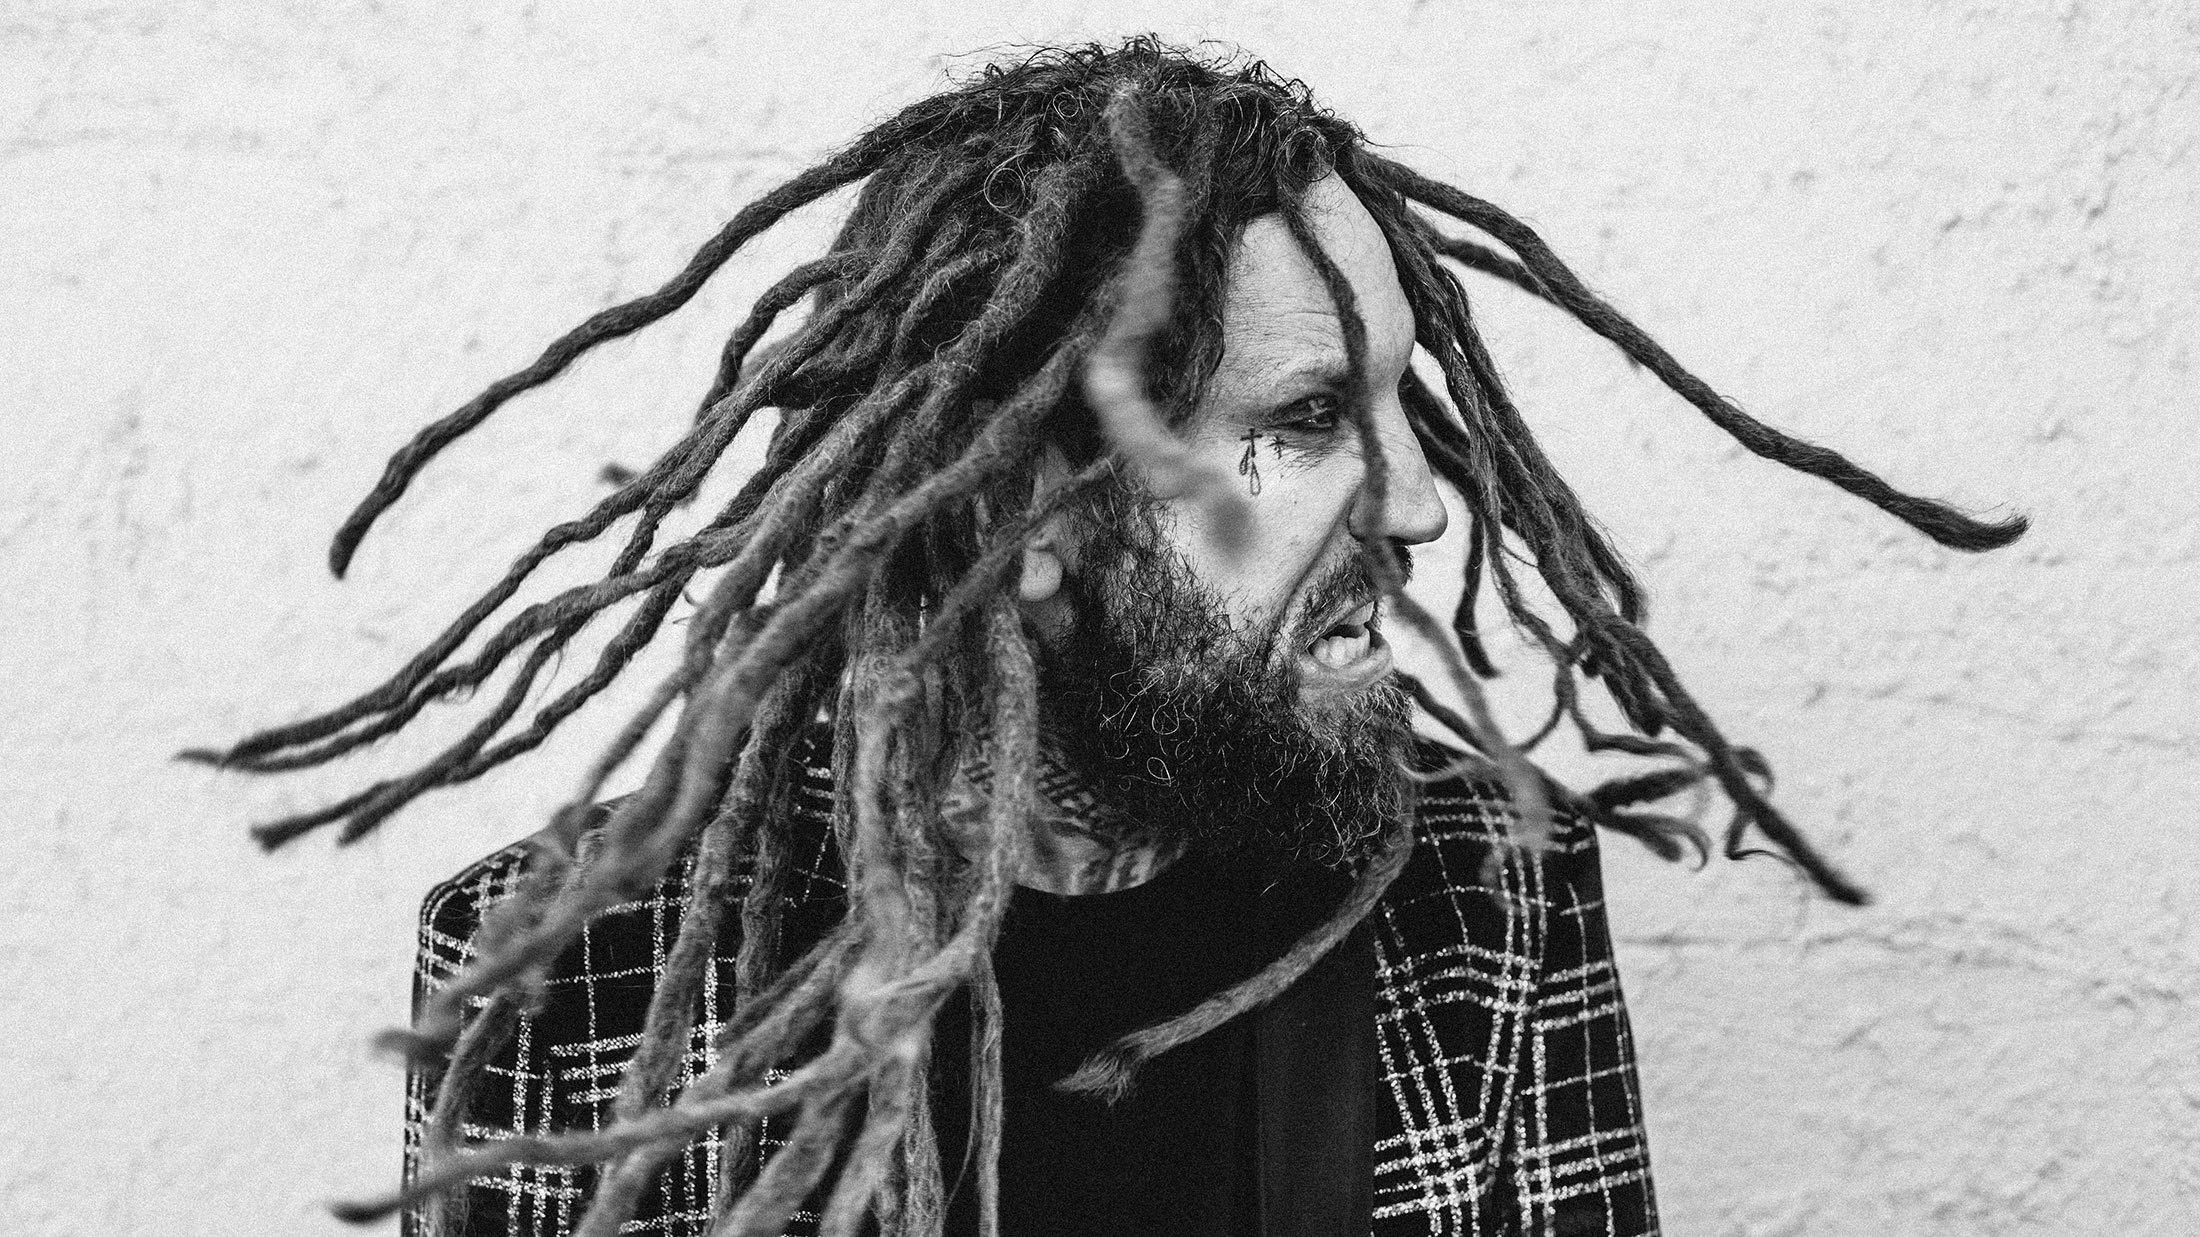 Brian 'Head' Welch: "I struggled with my thoughts, I struggled with my looks, so I found things to help me like comedy and music"